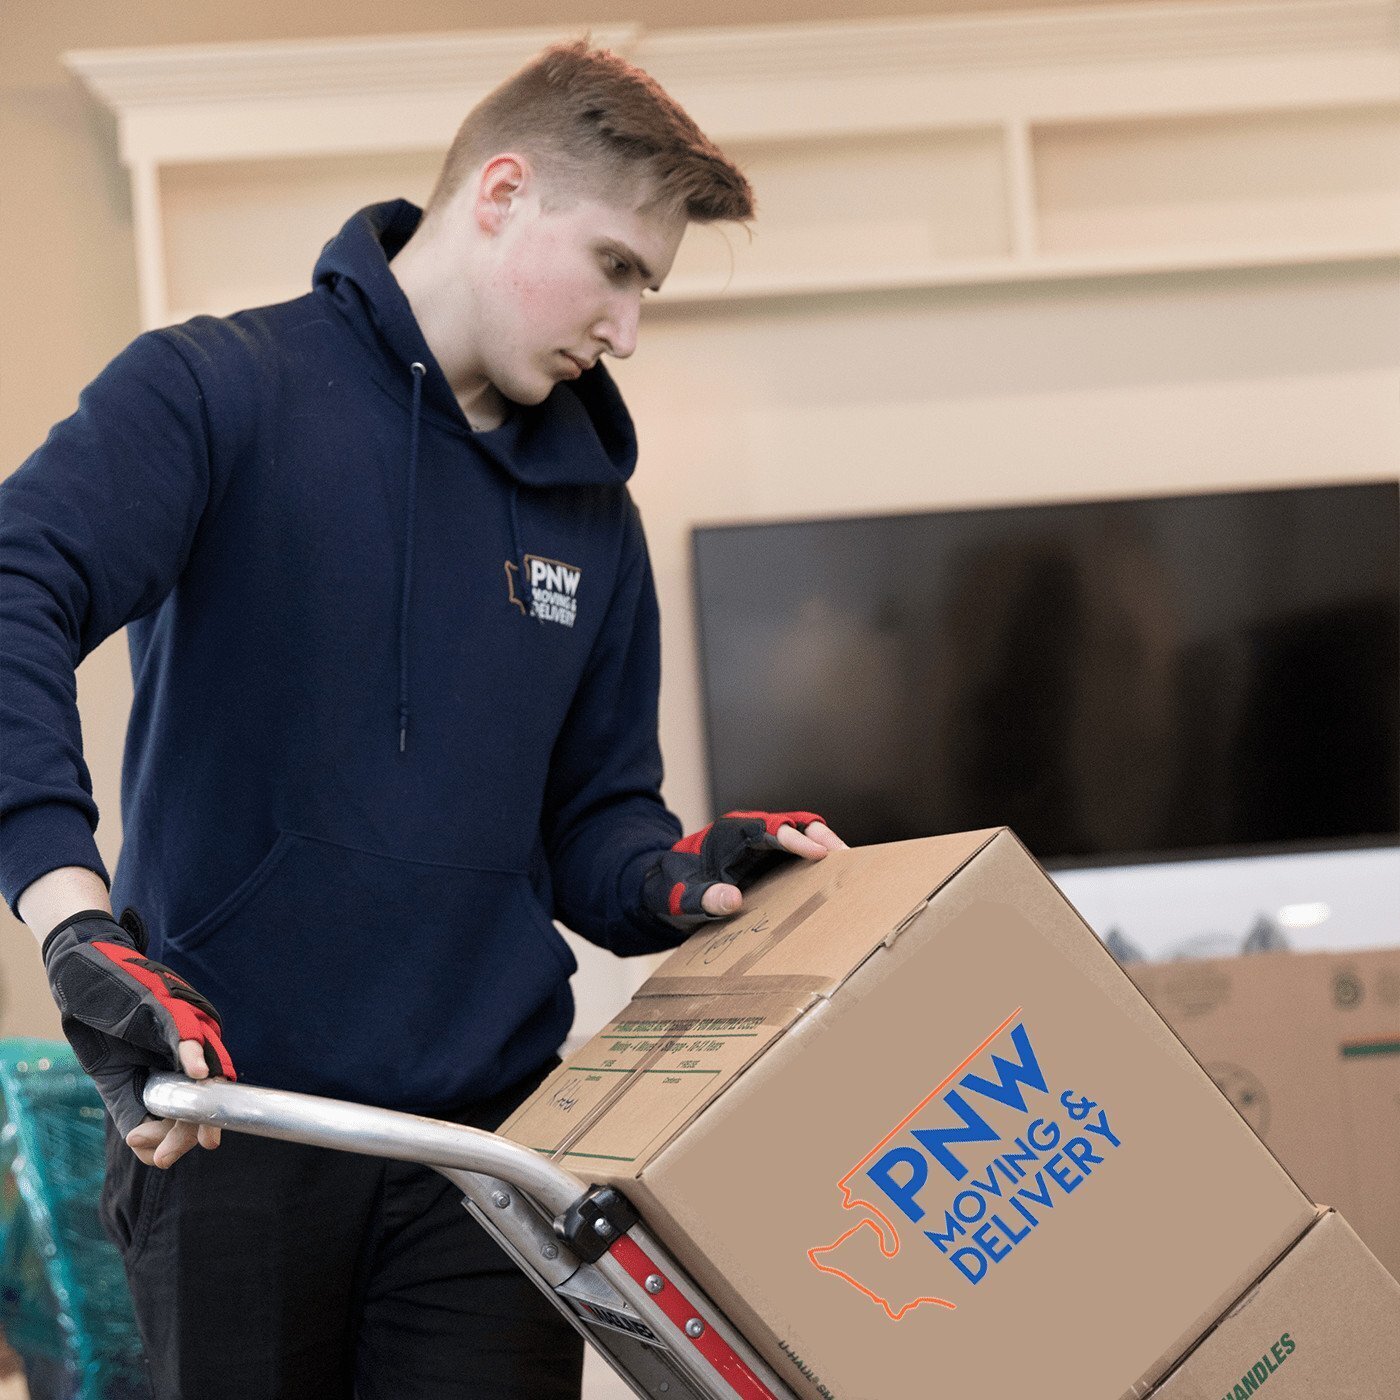 PNW Moving and Delivery offers a wide range of moving services. From meticulous packing to secure storage, the company has earned a reputation for reliability and excellence in the moving industry.